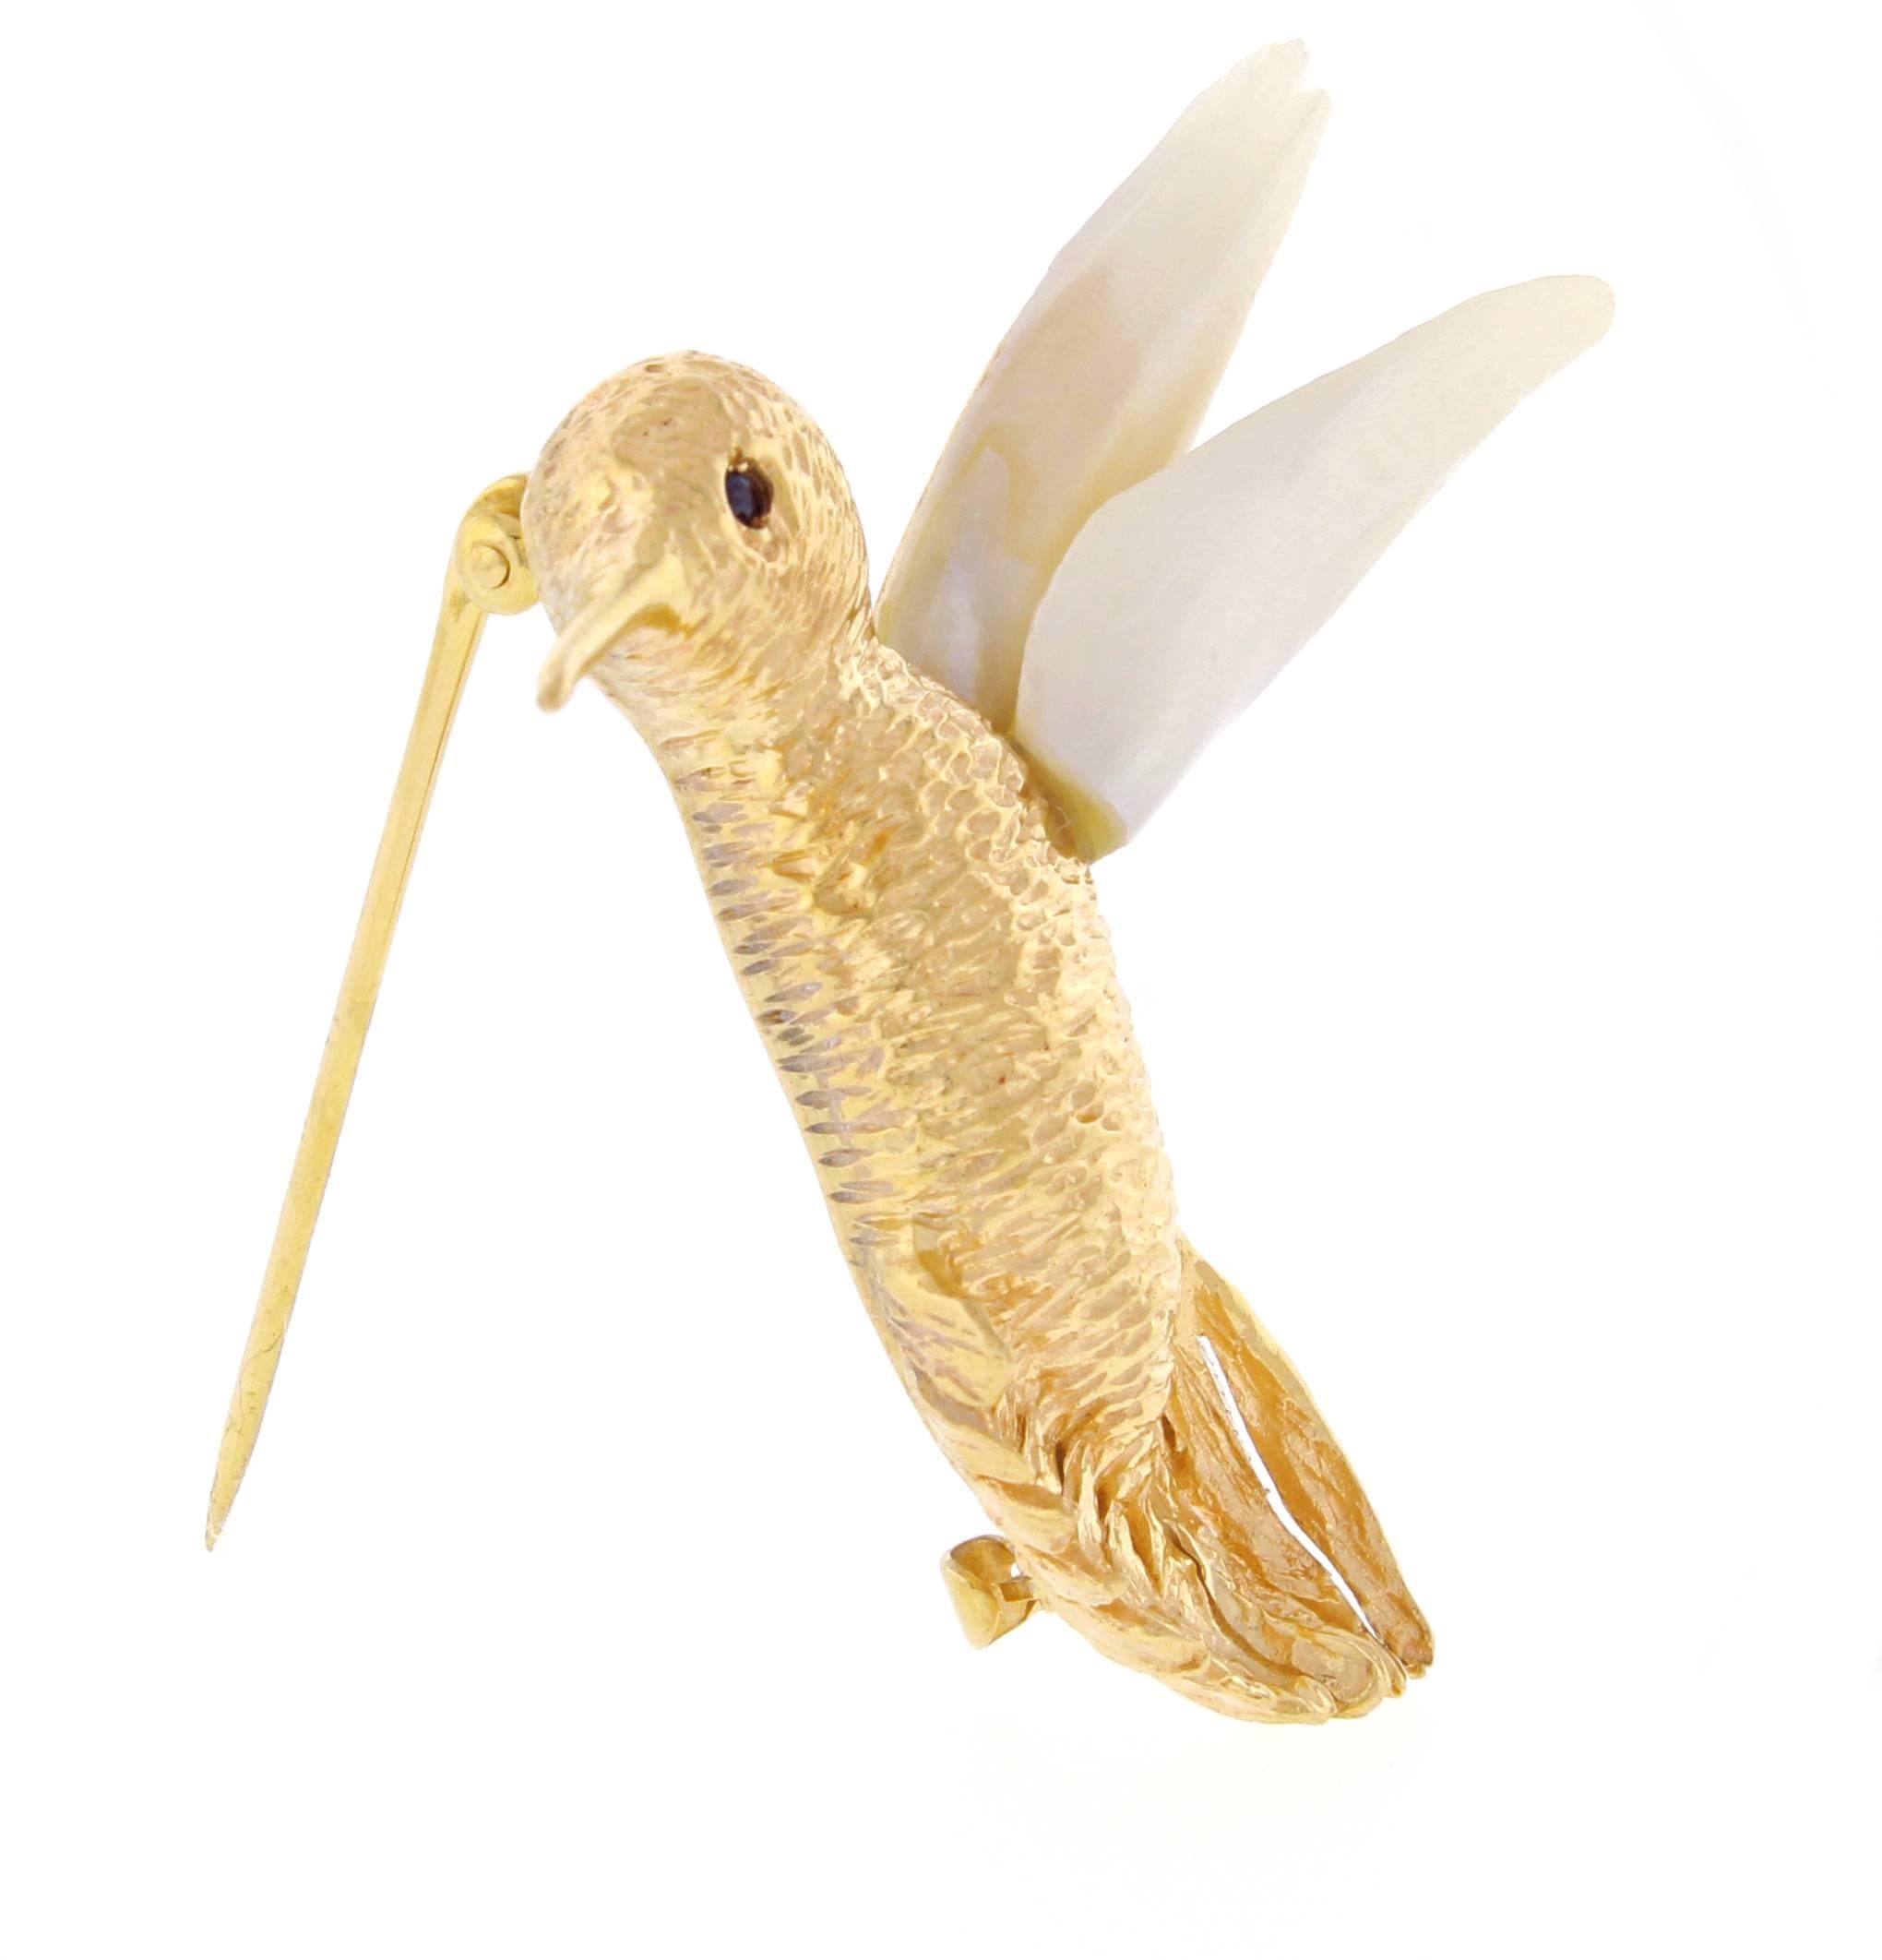  Whimsical hummingbird brooch by William Ruser is truly an special piece. A vintage design in textured and polished  14 karat yellow gold forms the figure of a hummingbird in flight.  Rare one inch elongated fresh water pearls form the wings.  1